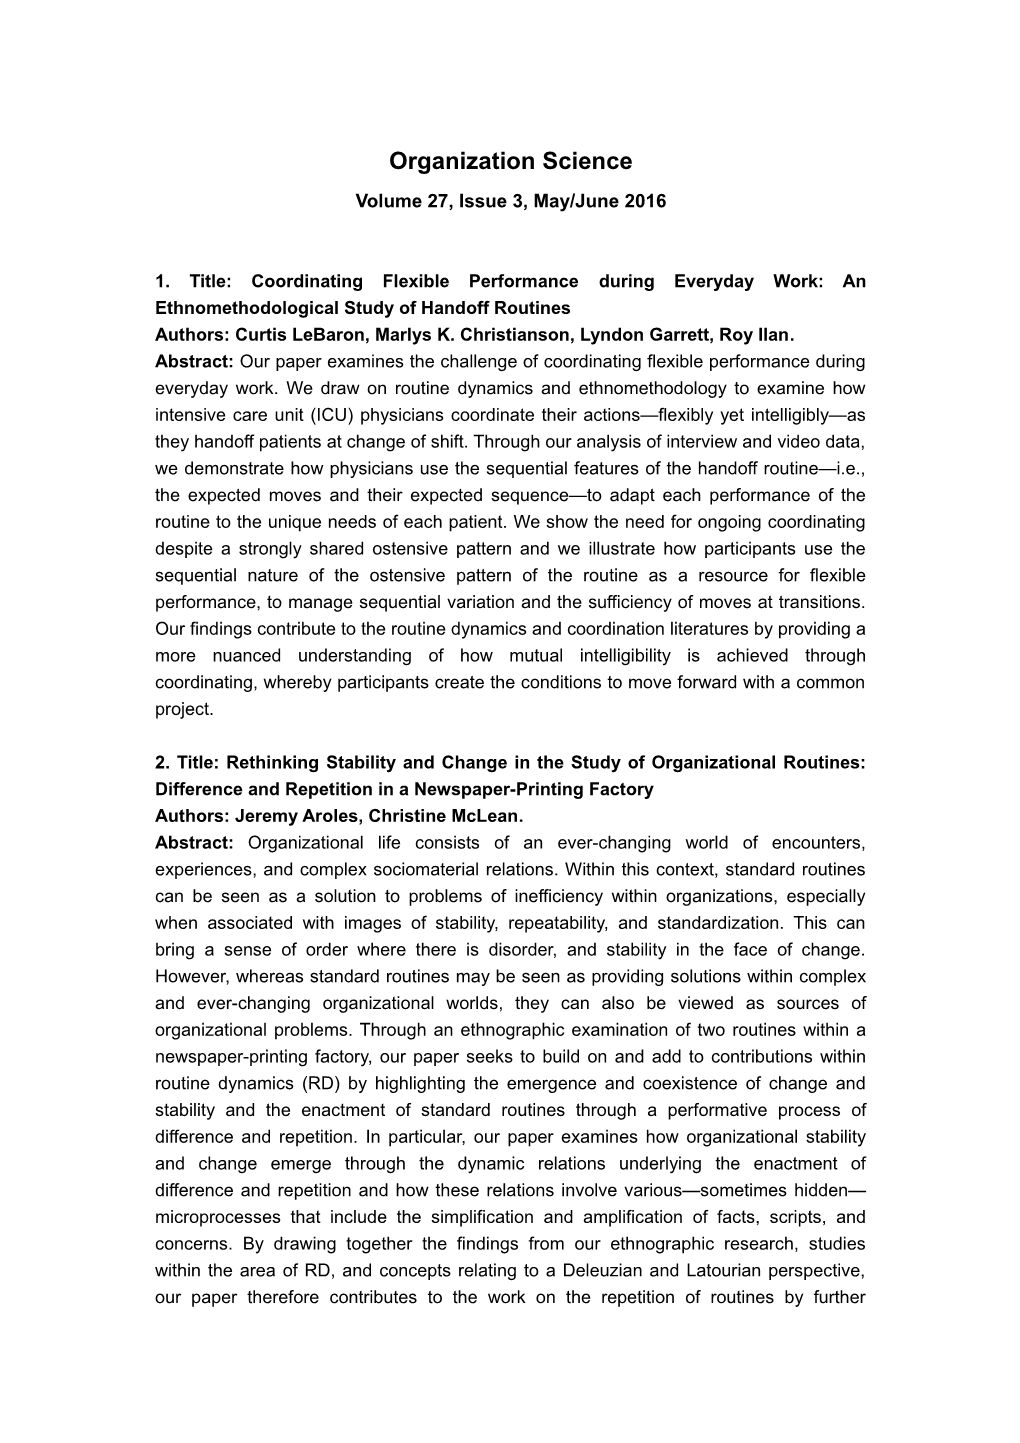 1. Title: Coordinating Flexible Performance During Everyday Work: an Ethnomethodological